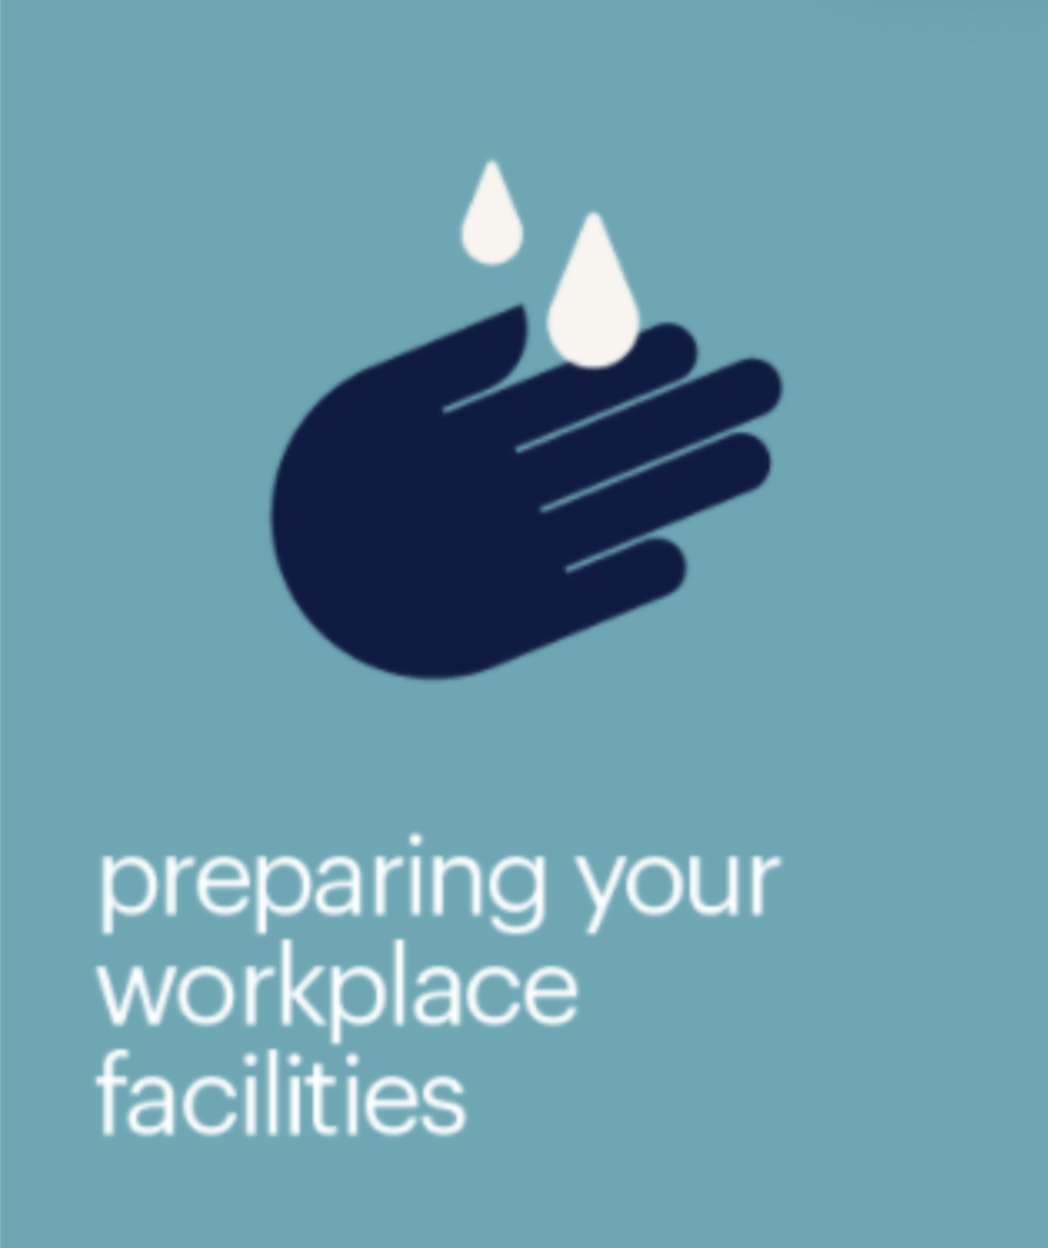 preparing-workplace-facilities-covid-19.png